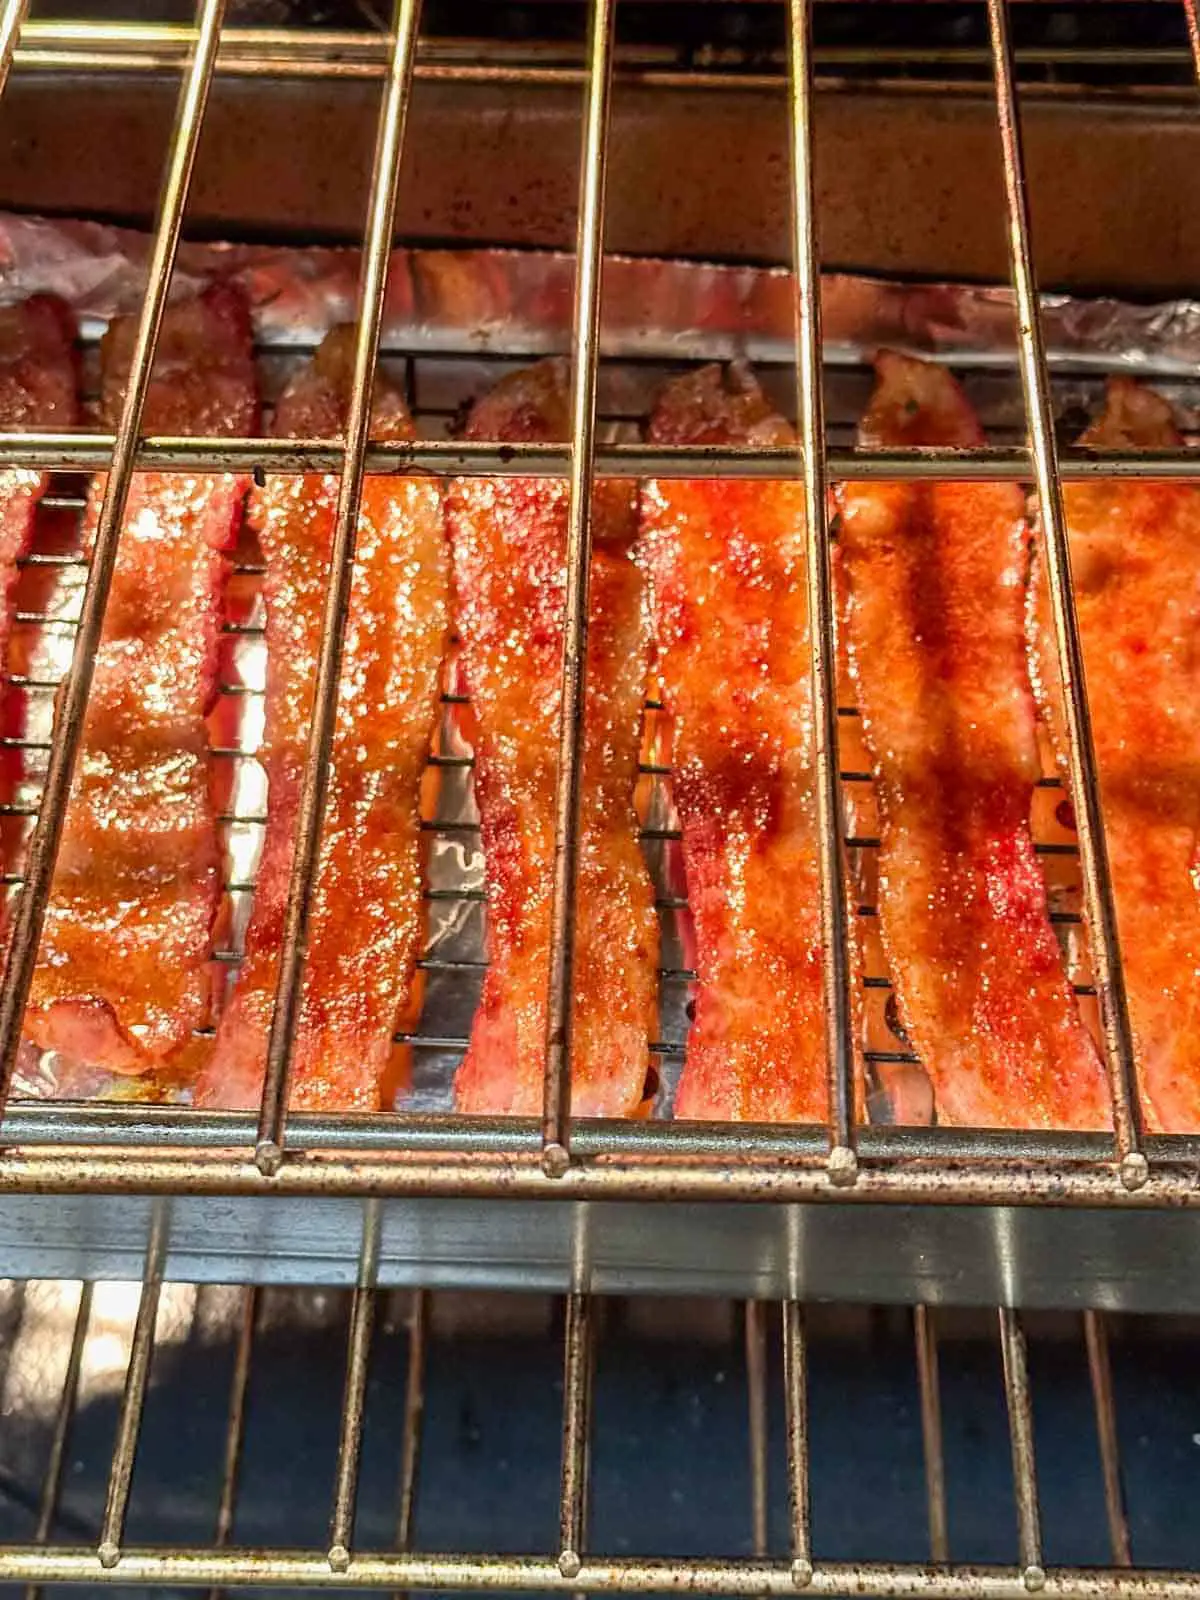 Scorpion pepper bacon on a roasting tray rack baking in an oven.